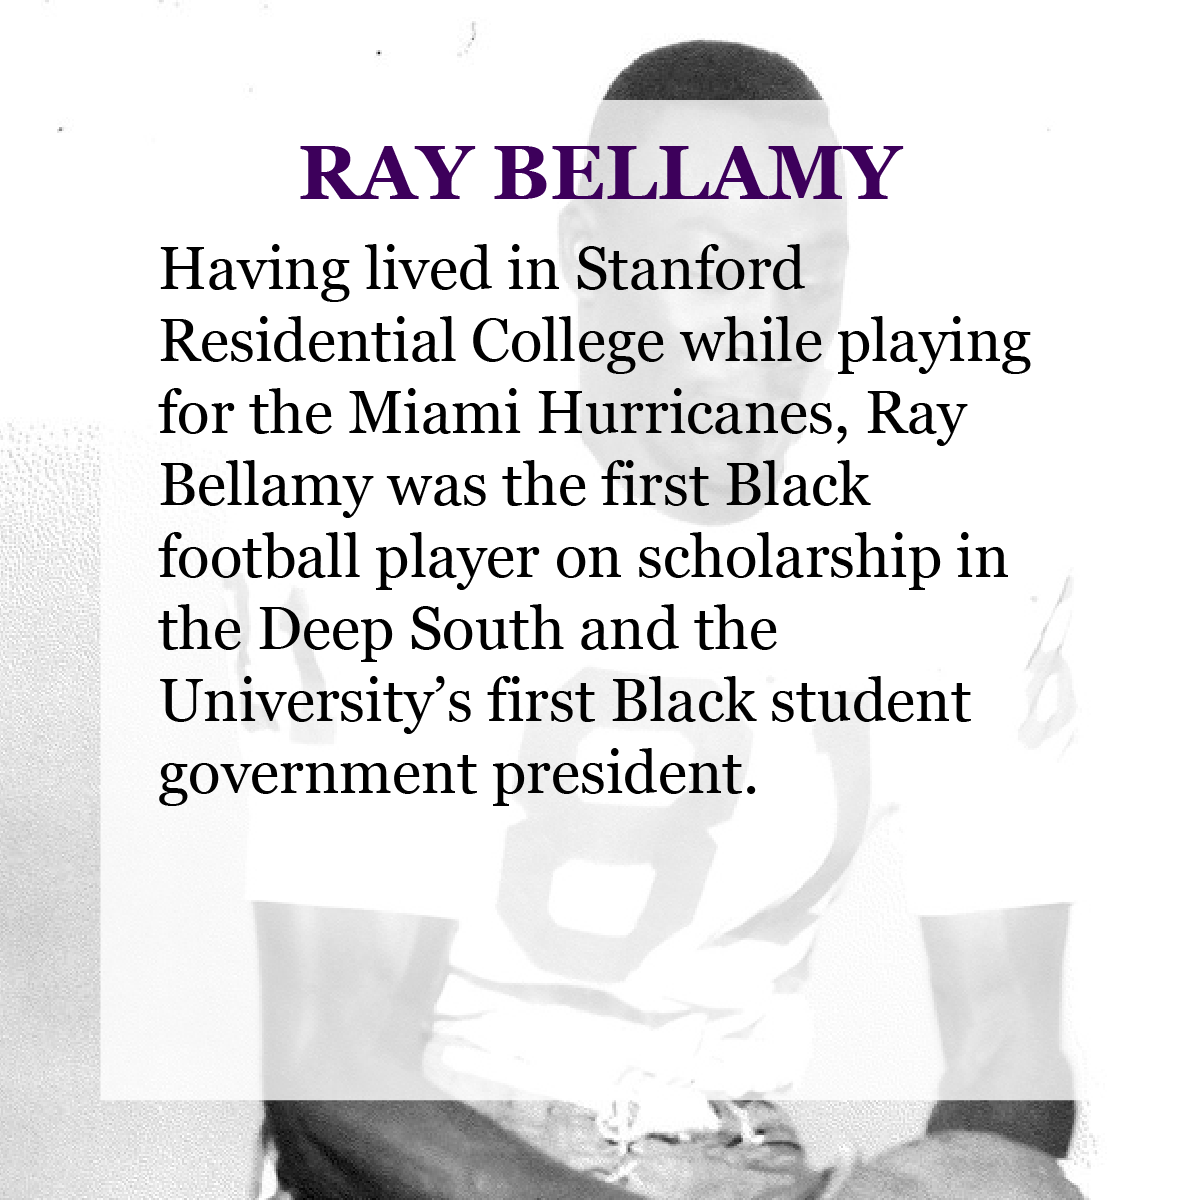 Text: Ray Bellamy - Having lived in Stanford Residential College while playing for the Miami Hurricanes, Ray Bellamy was the first black football player on scholarship in the Deep South and the University’s first black student government president.